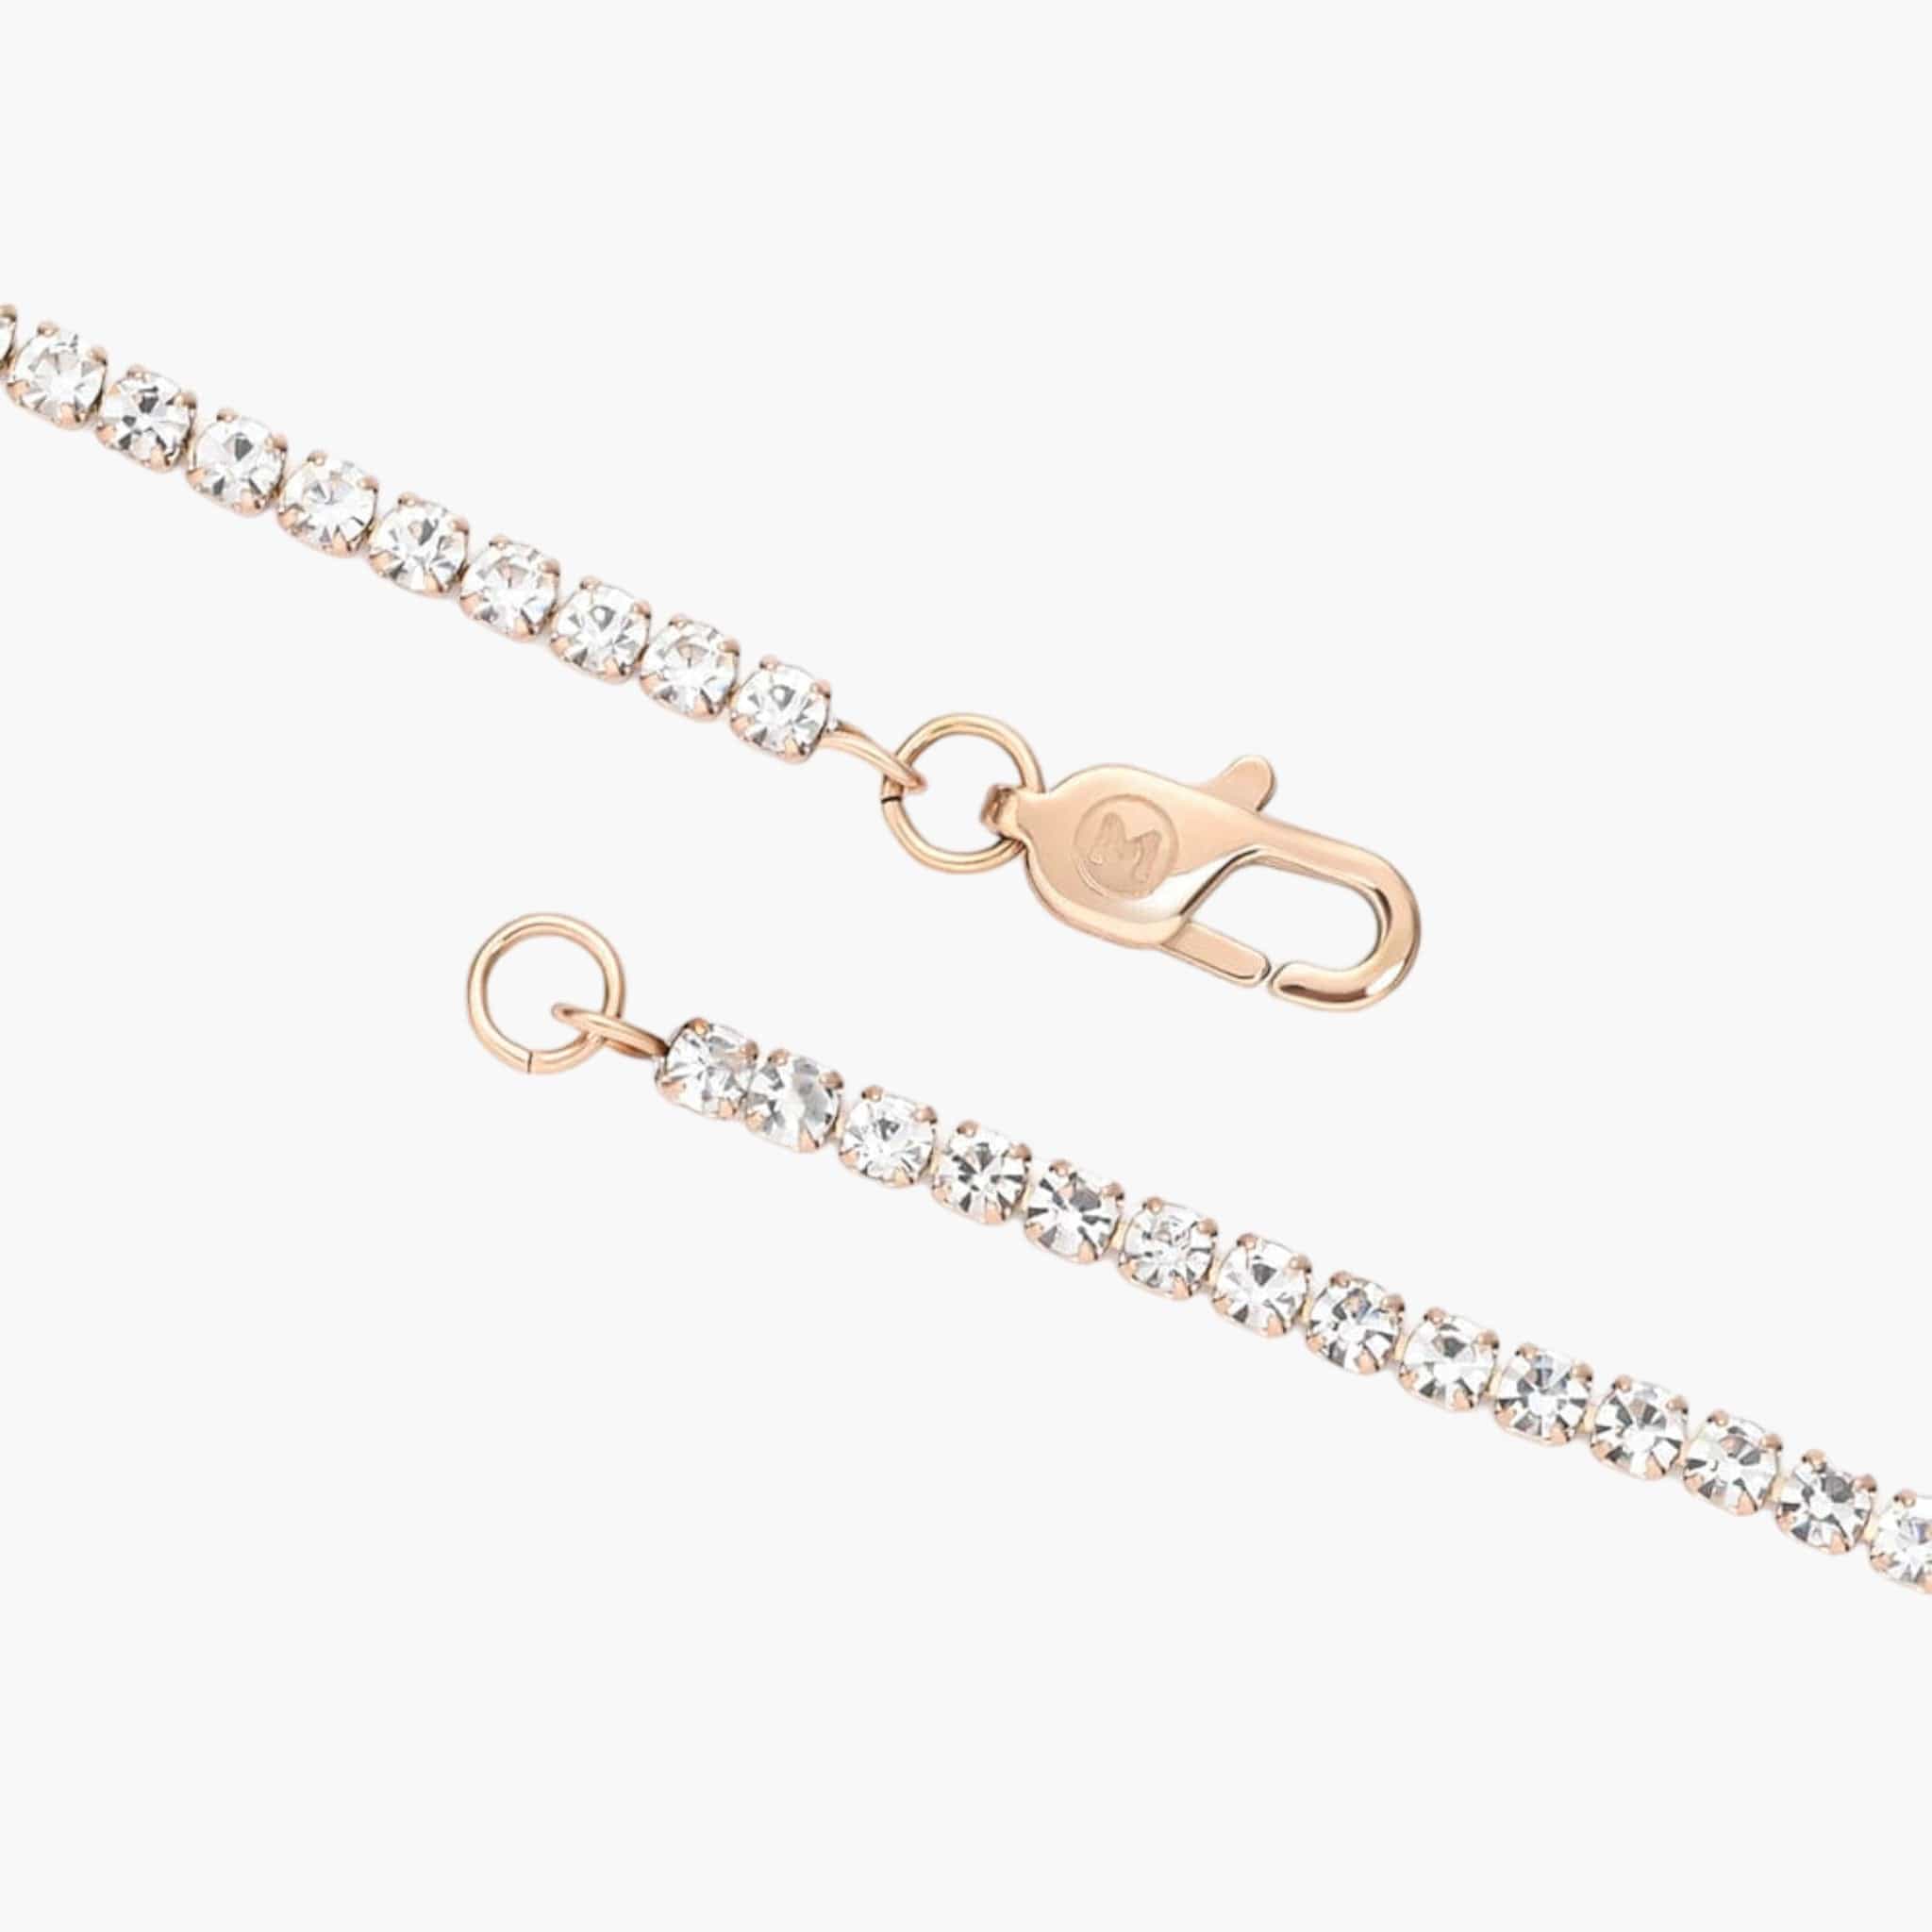 Women's 5mm Tennis Chain in Rose Gold - Helloice Jewelry